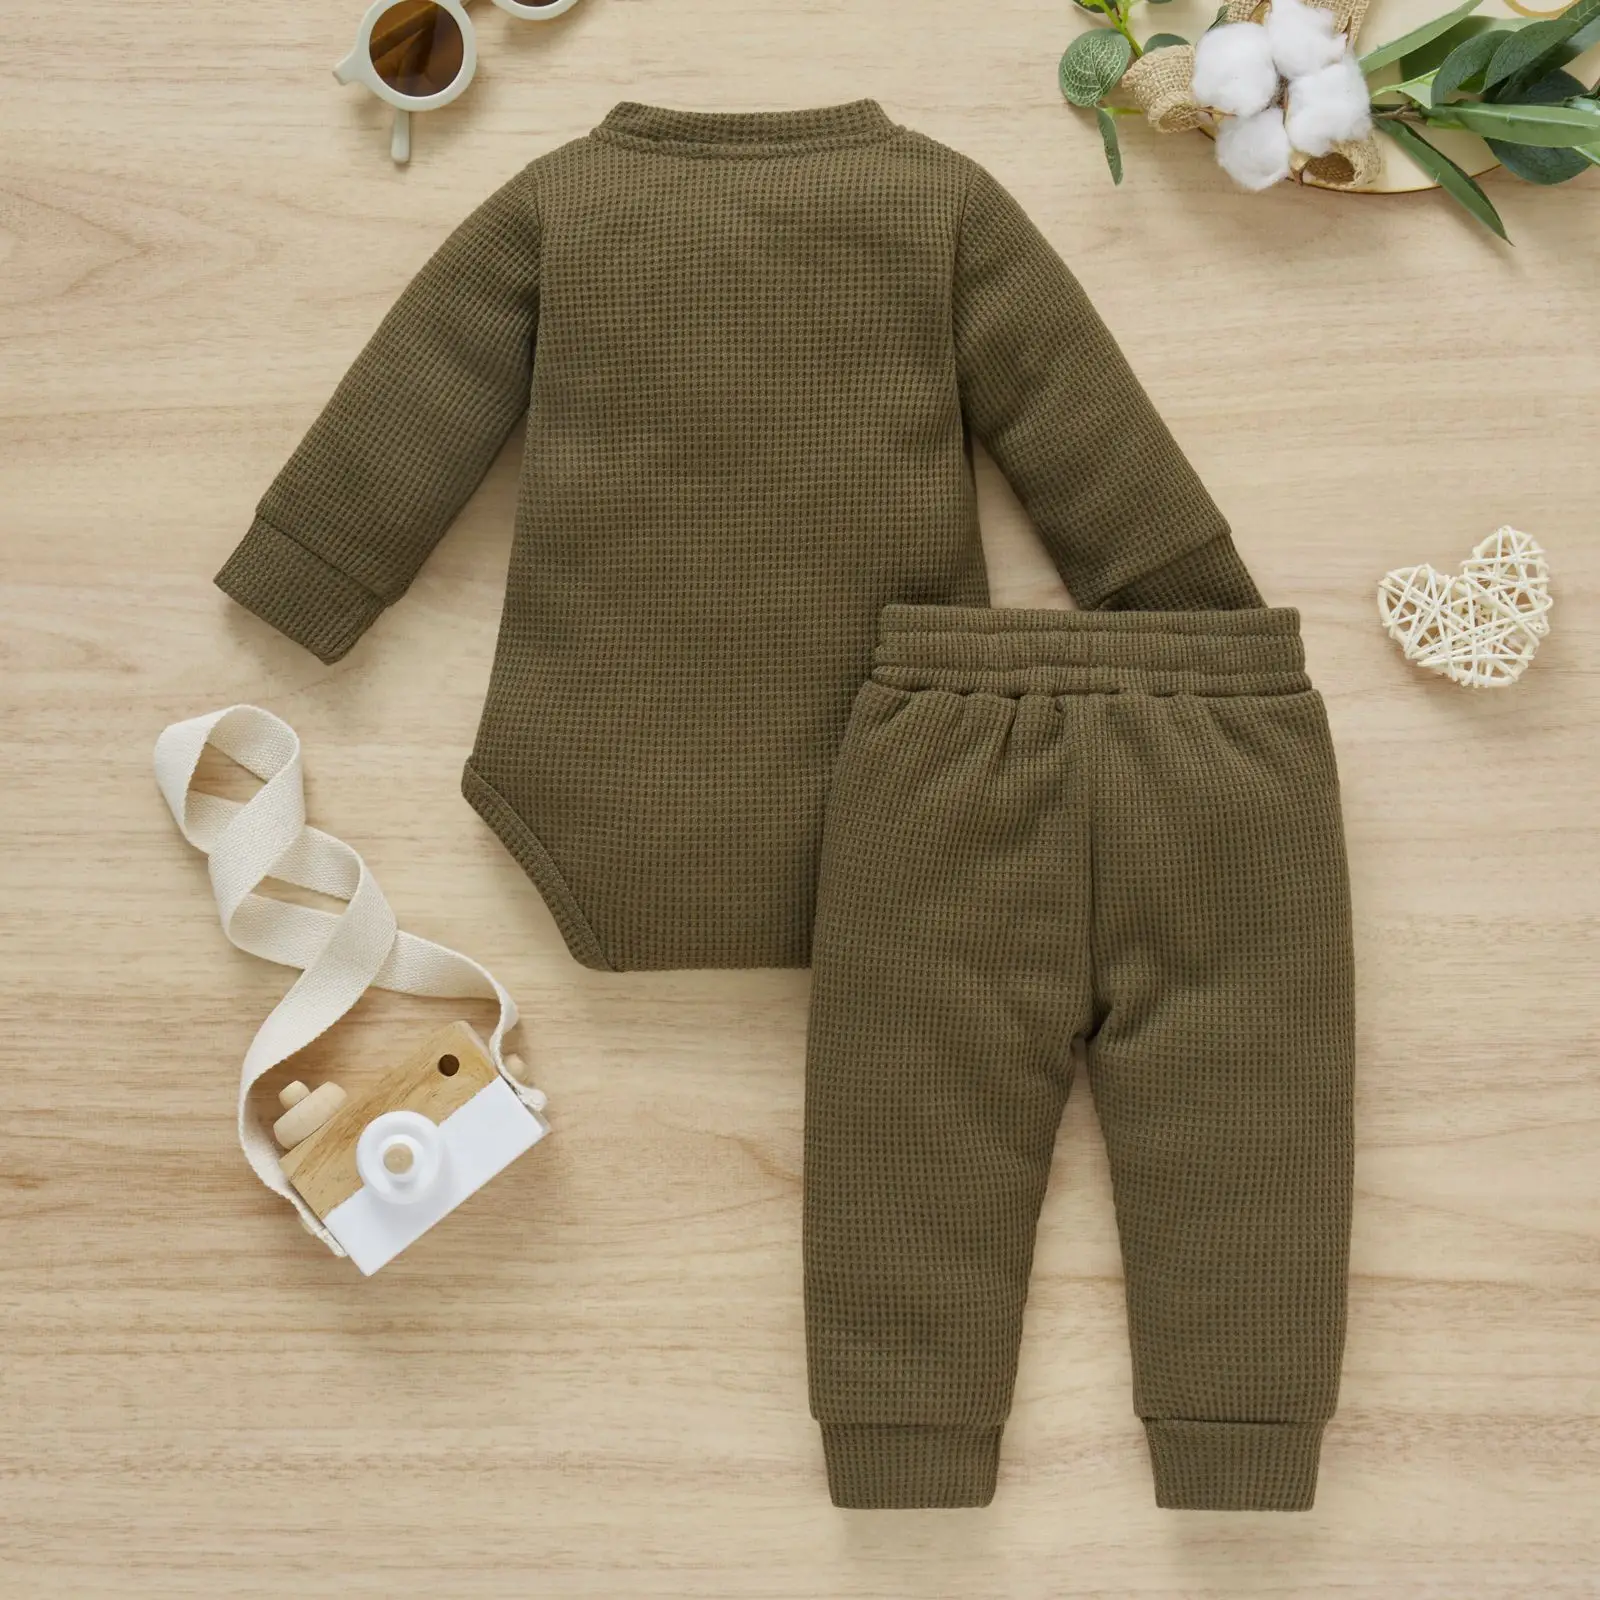 baby's complete set of clothing Baby Clothes Set 2pcs Spring Solid Long Sleeve Cotton Bodysuit Pants Autumn Infants Suits Toddler Boys Girls Outfits baby clothes set gift